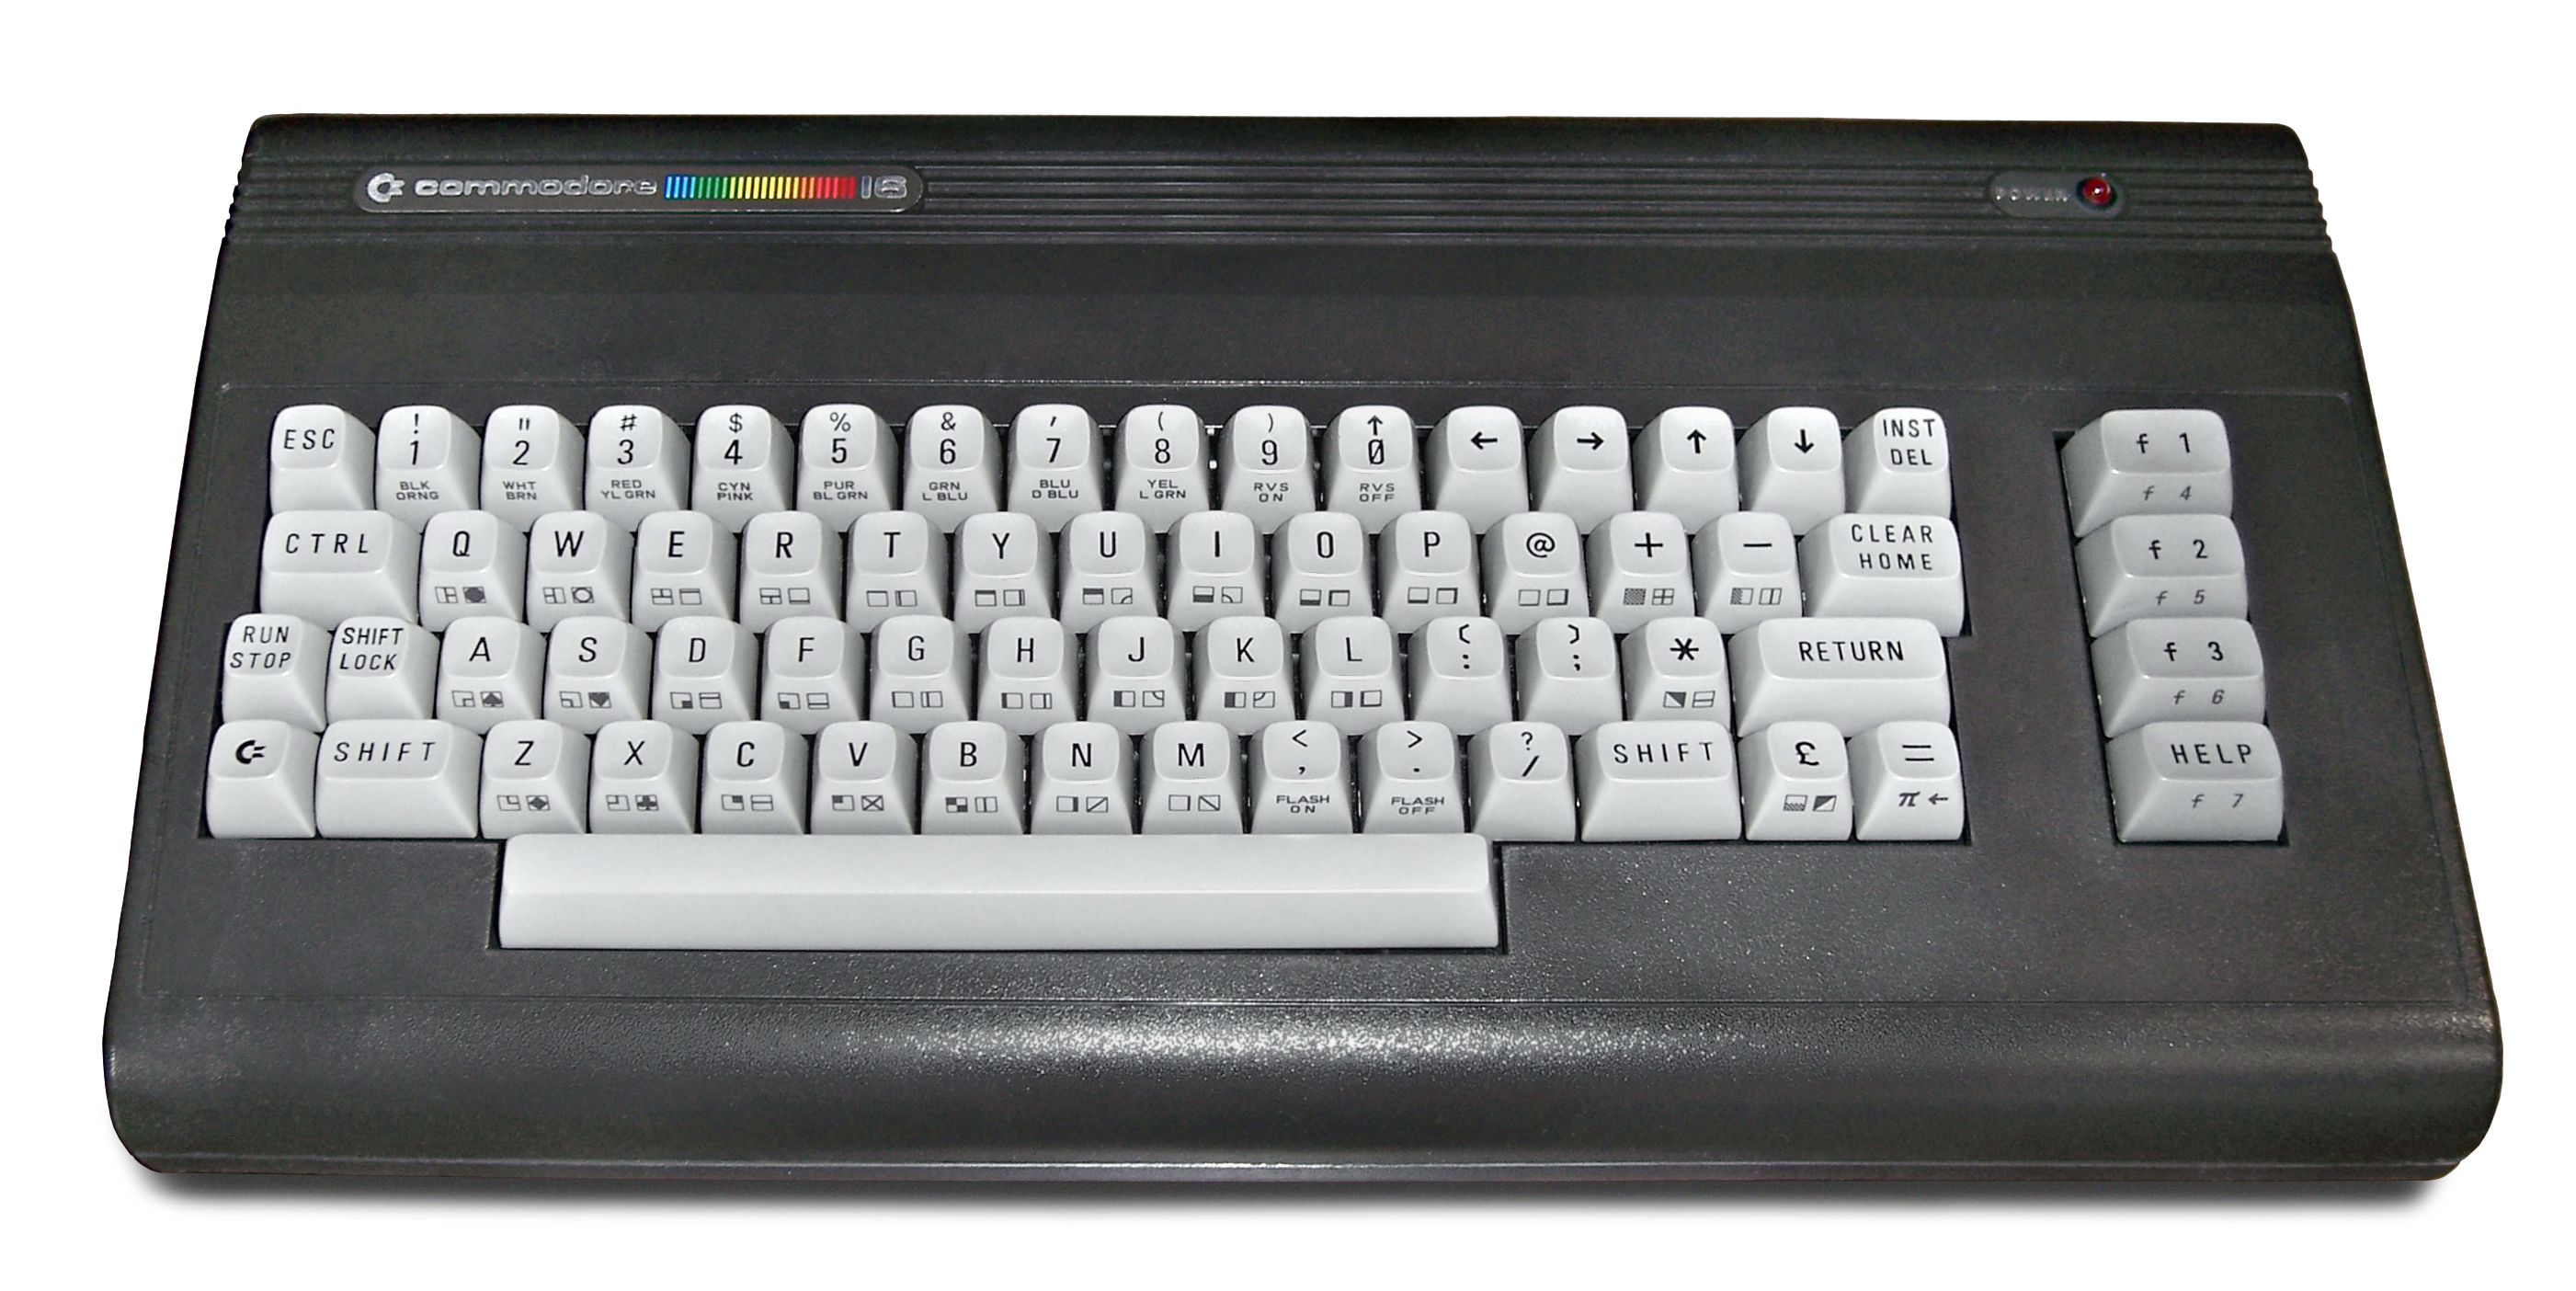 Commodore commodore 64 keyboard and manual 